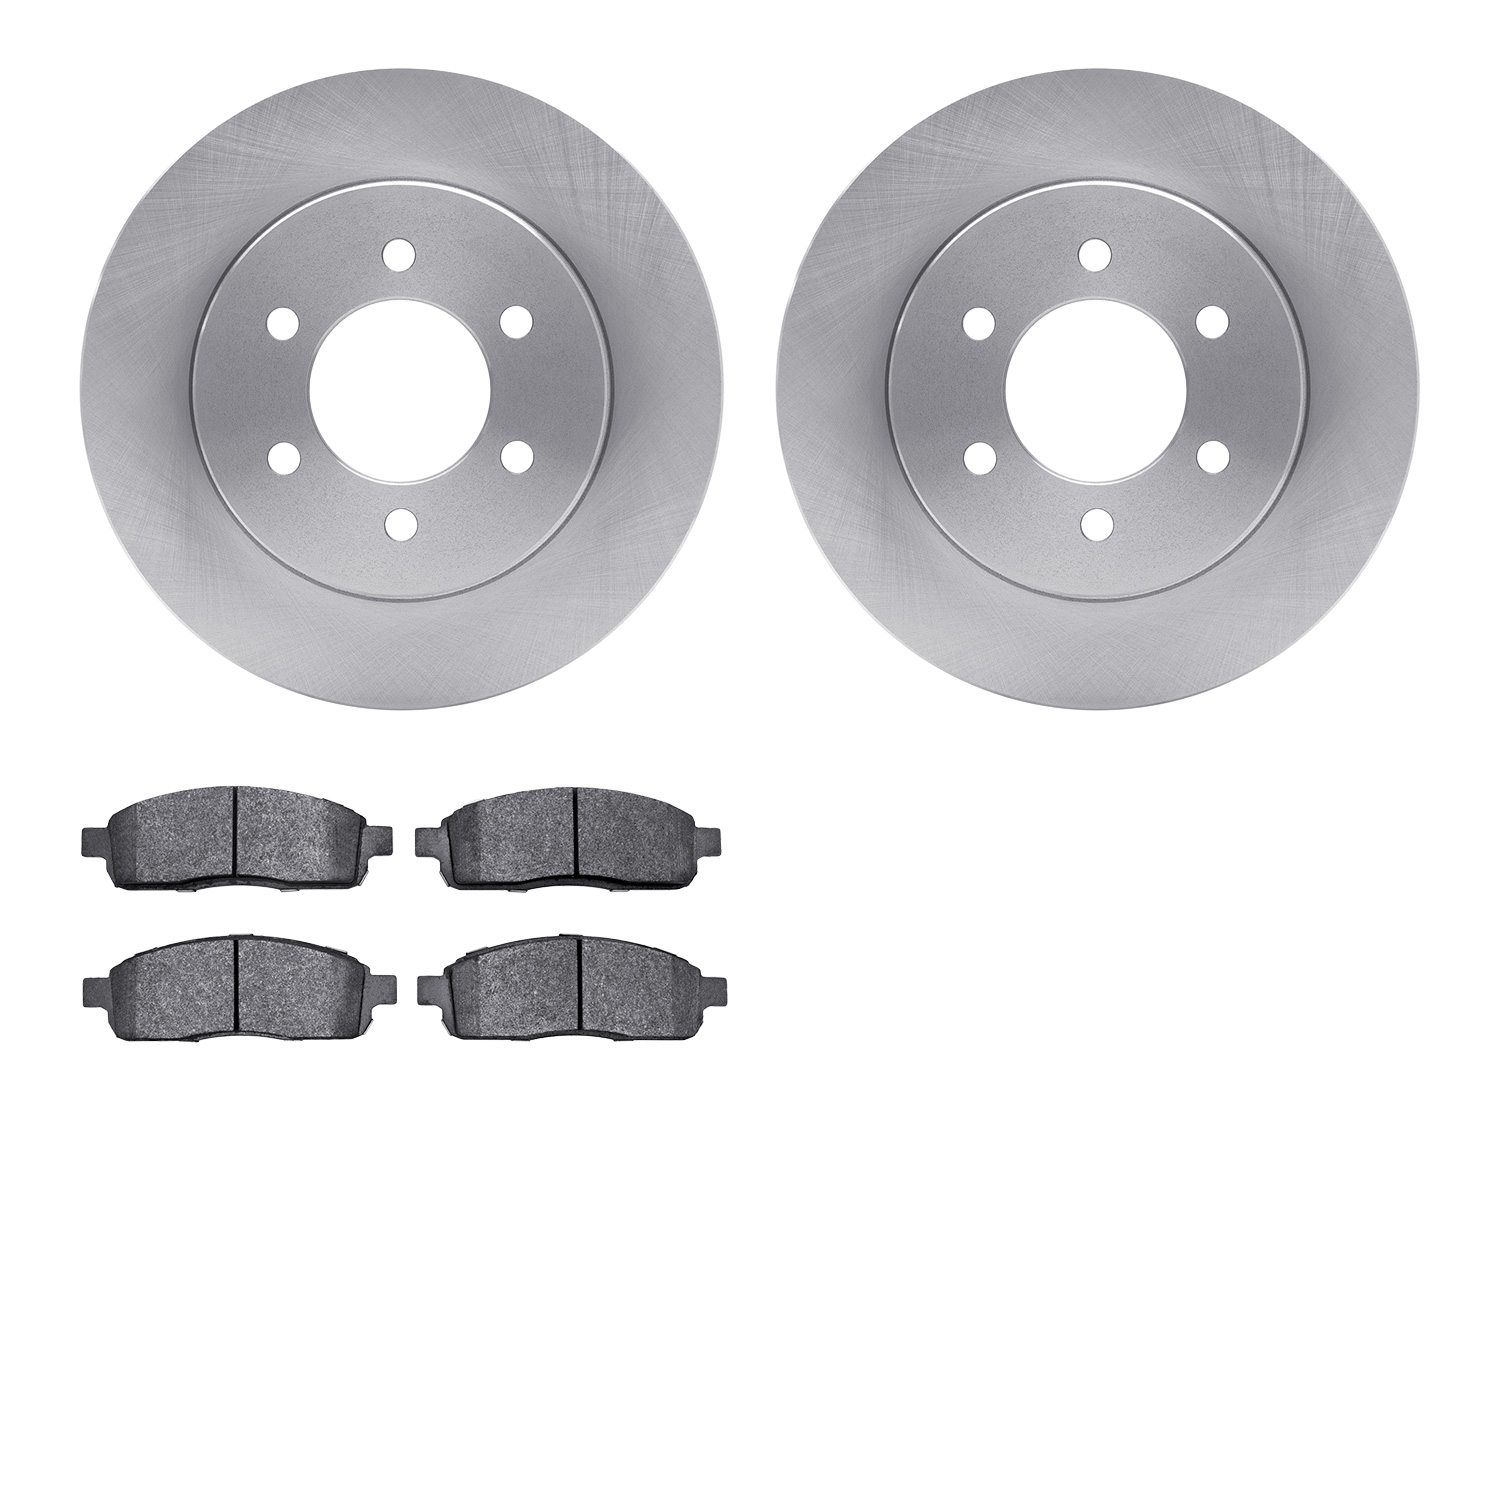 6402-54212 Brake Rotors with Ultimate-Duty Brake Pads, 2004-2008 Ford/Lincoln/Mercury/Mazda, Position: Front